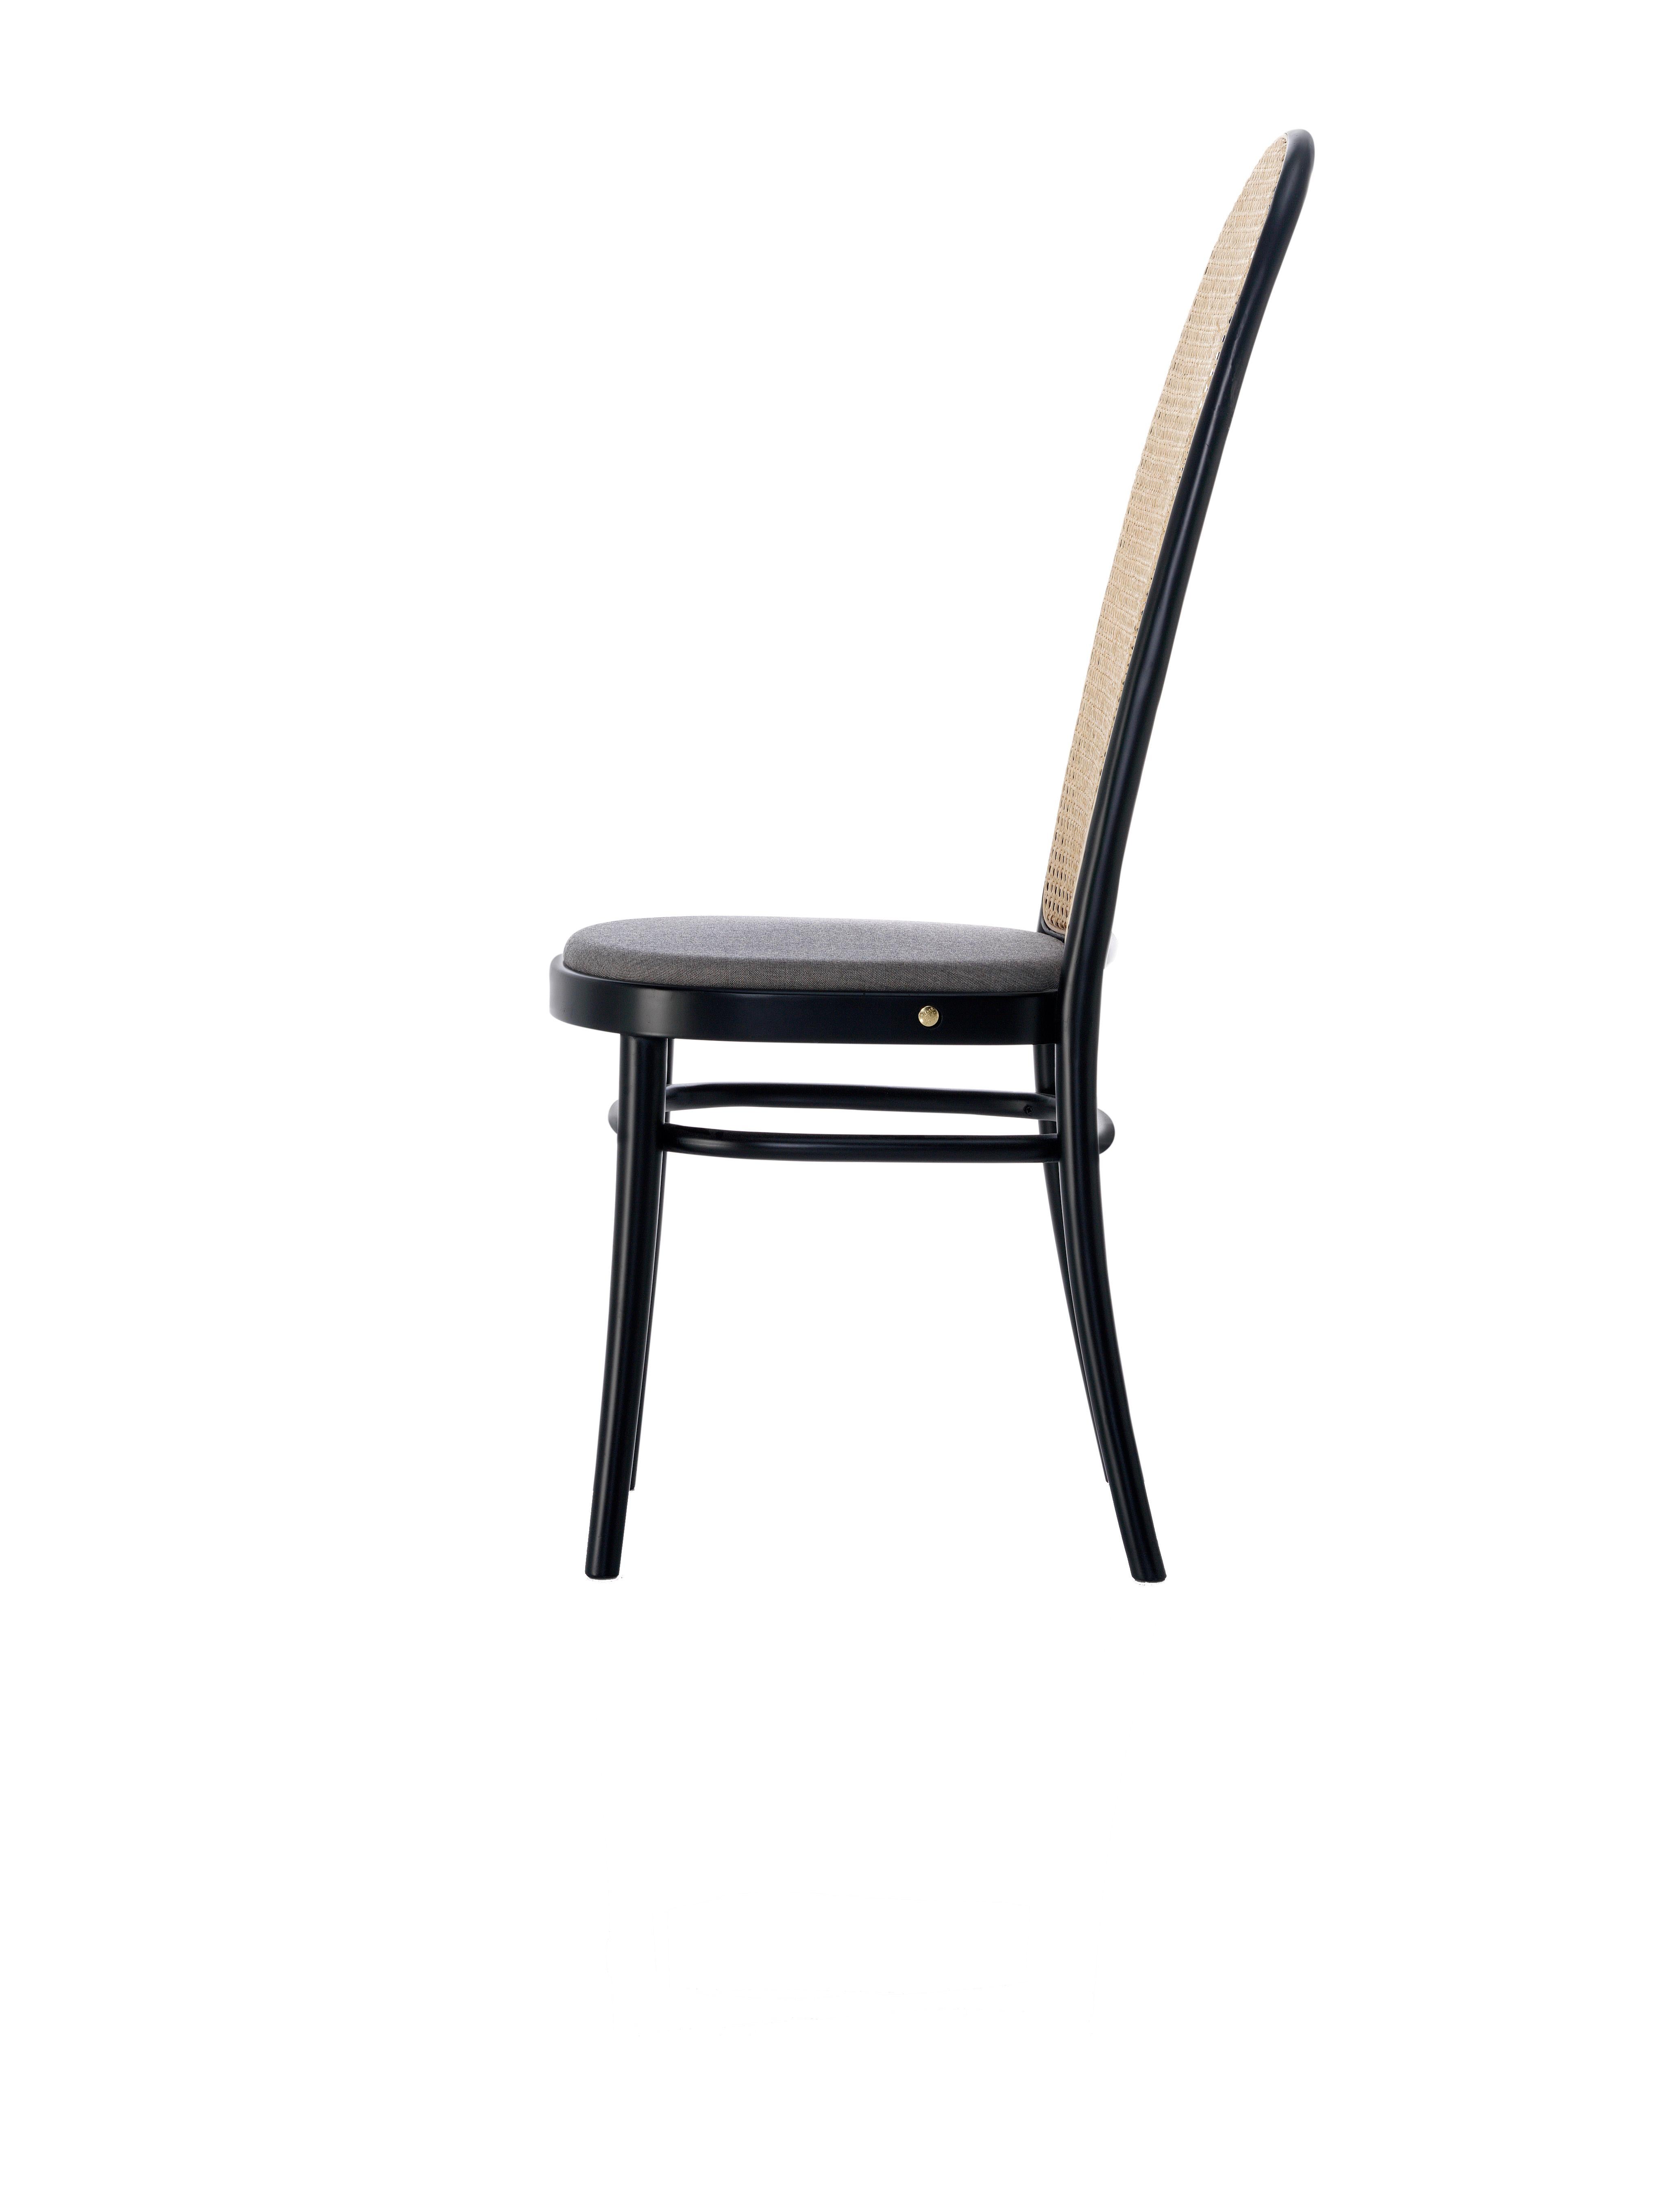 Morris chair, by the creative duo GamFratesi, reinterprets the classic Viennese seat, by using new proportions which broaden its perspective, suggesting new references to design icons. The structure is made up of steam-bent solid beech elements and